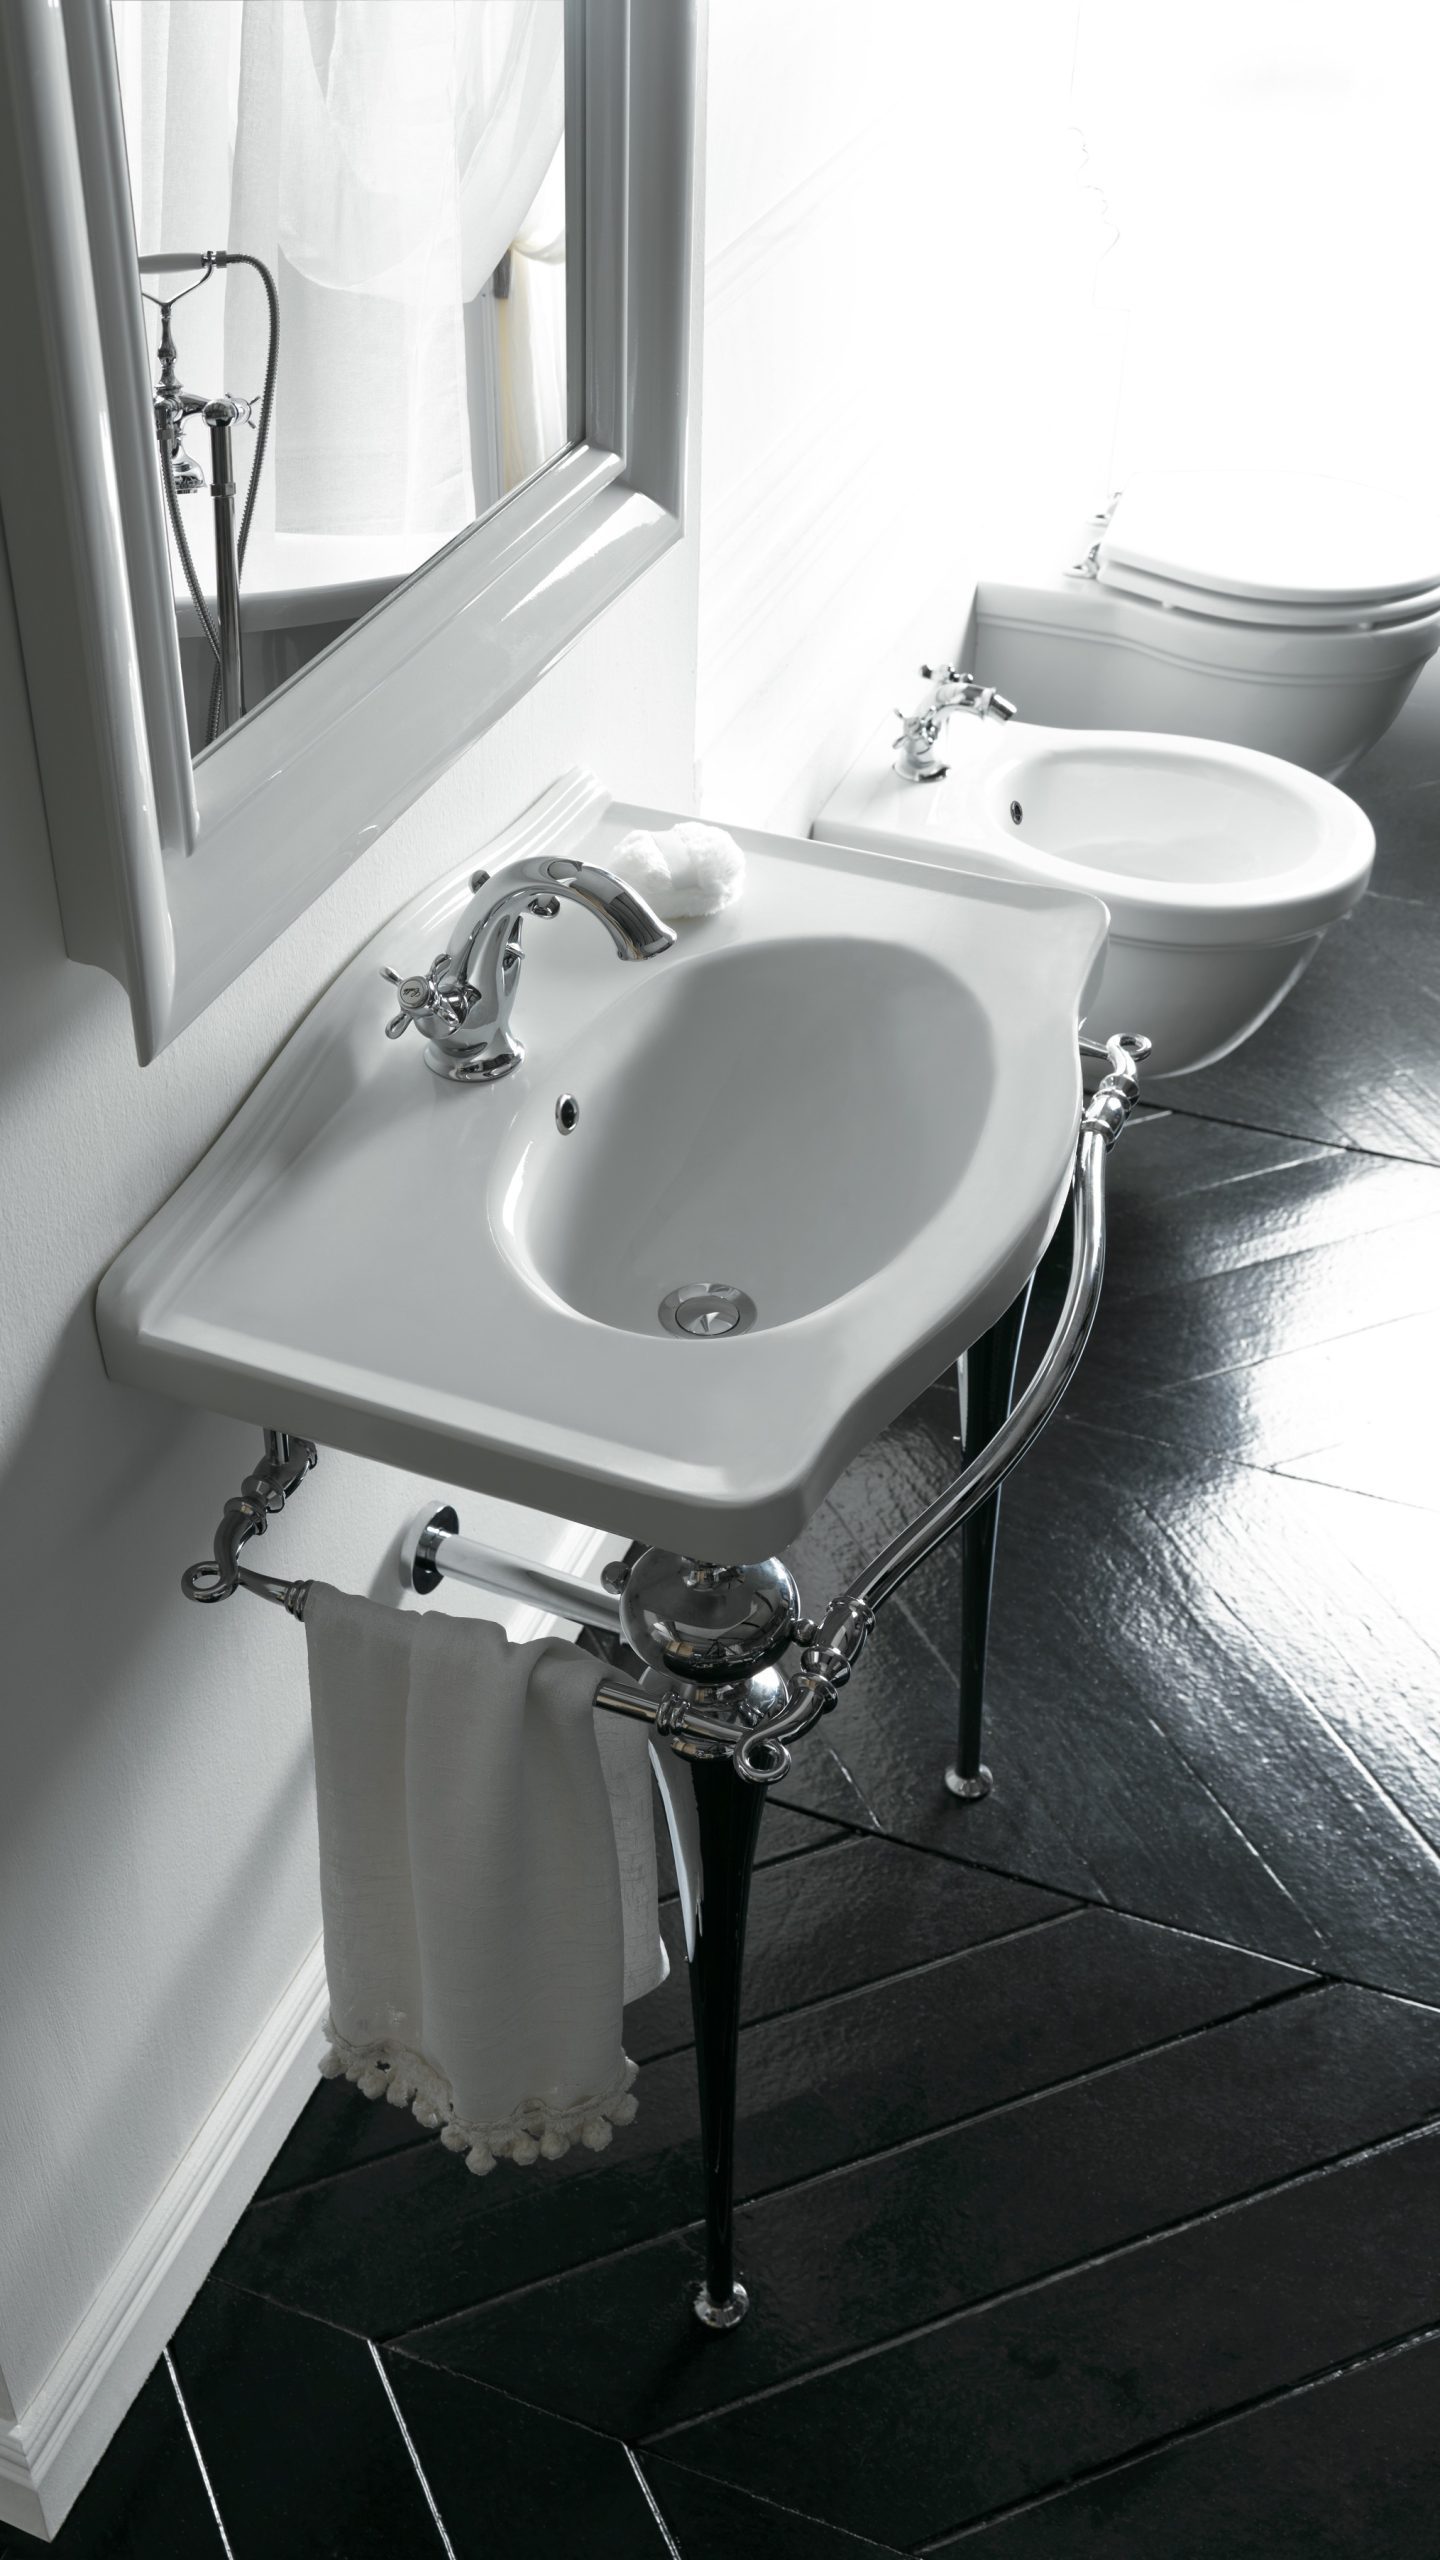 All of Albion's sanitary ware is brilliant white